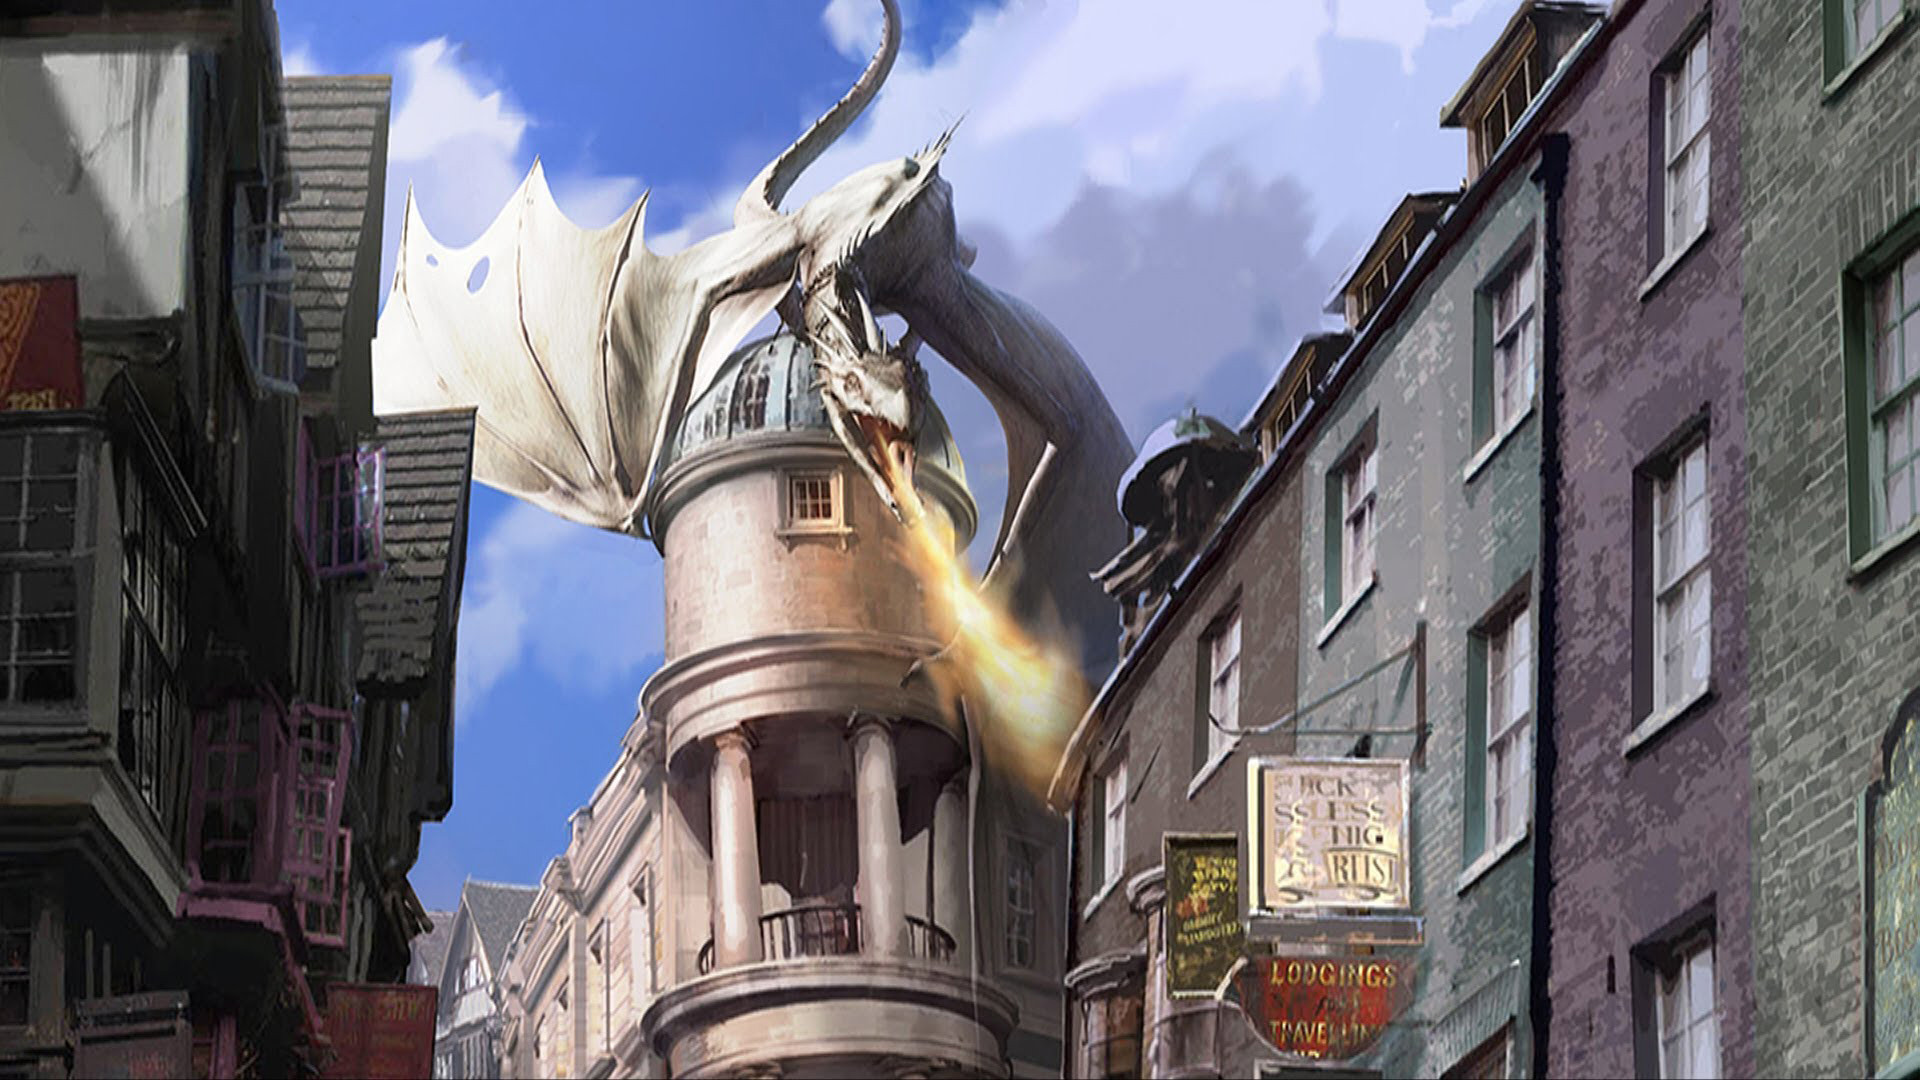 Photos: Universal Orlando adds Diagon Alley to Wizarding World of Harry